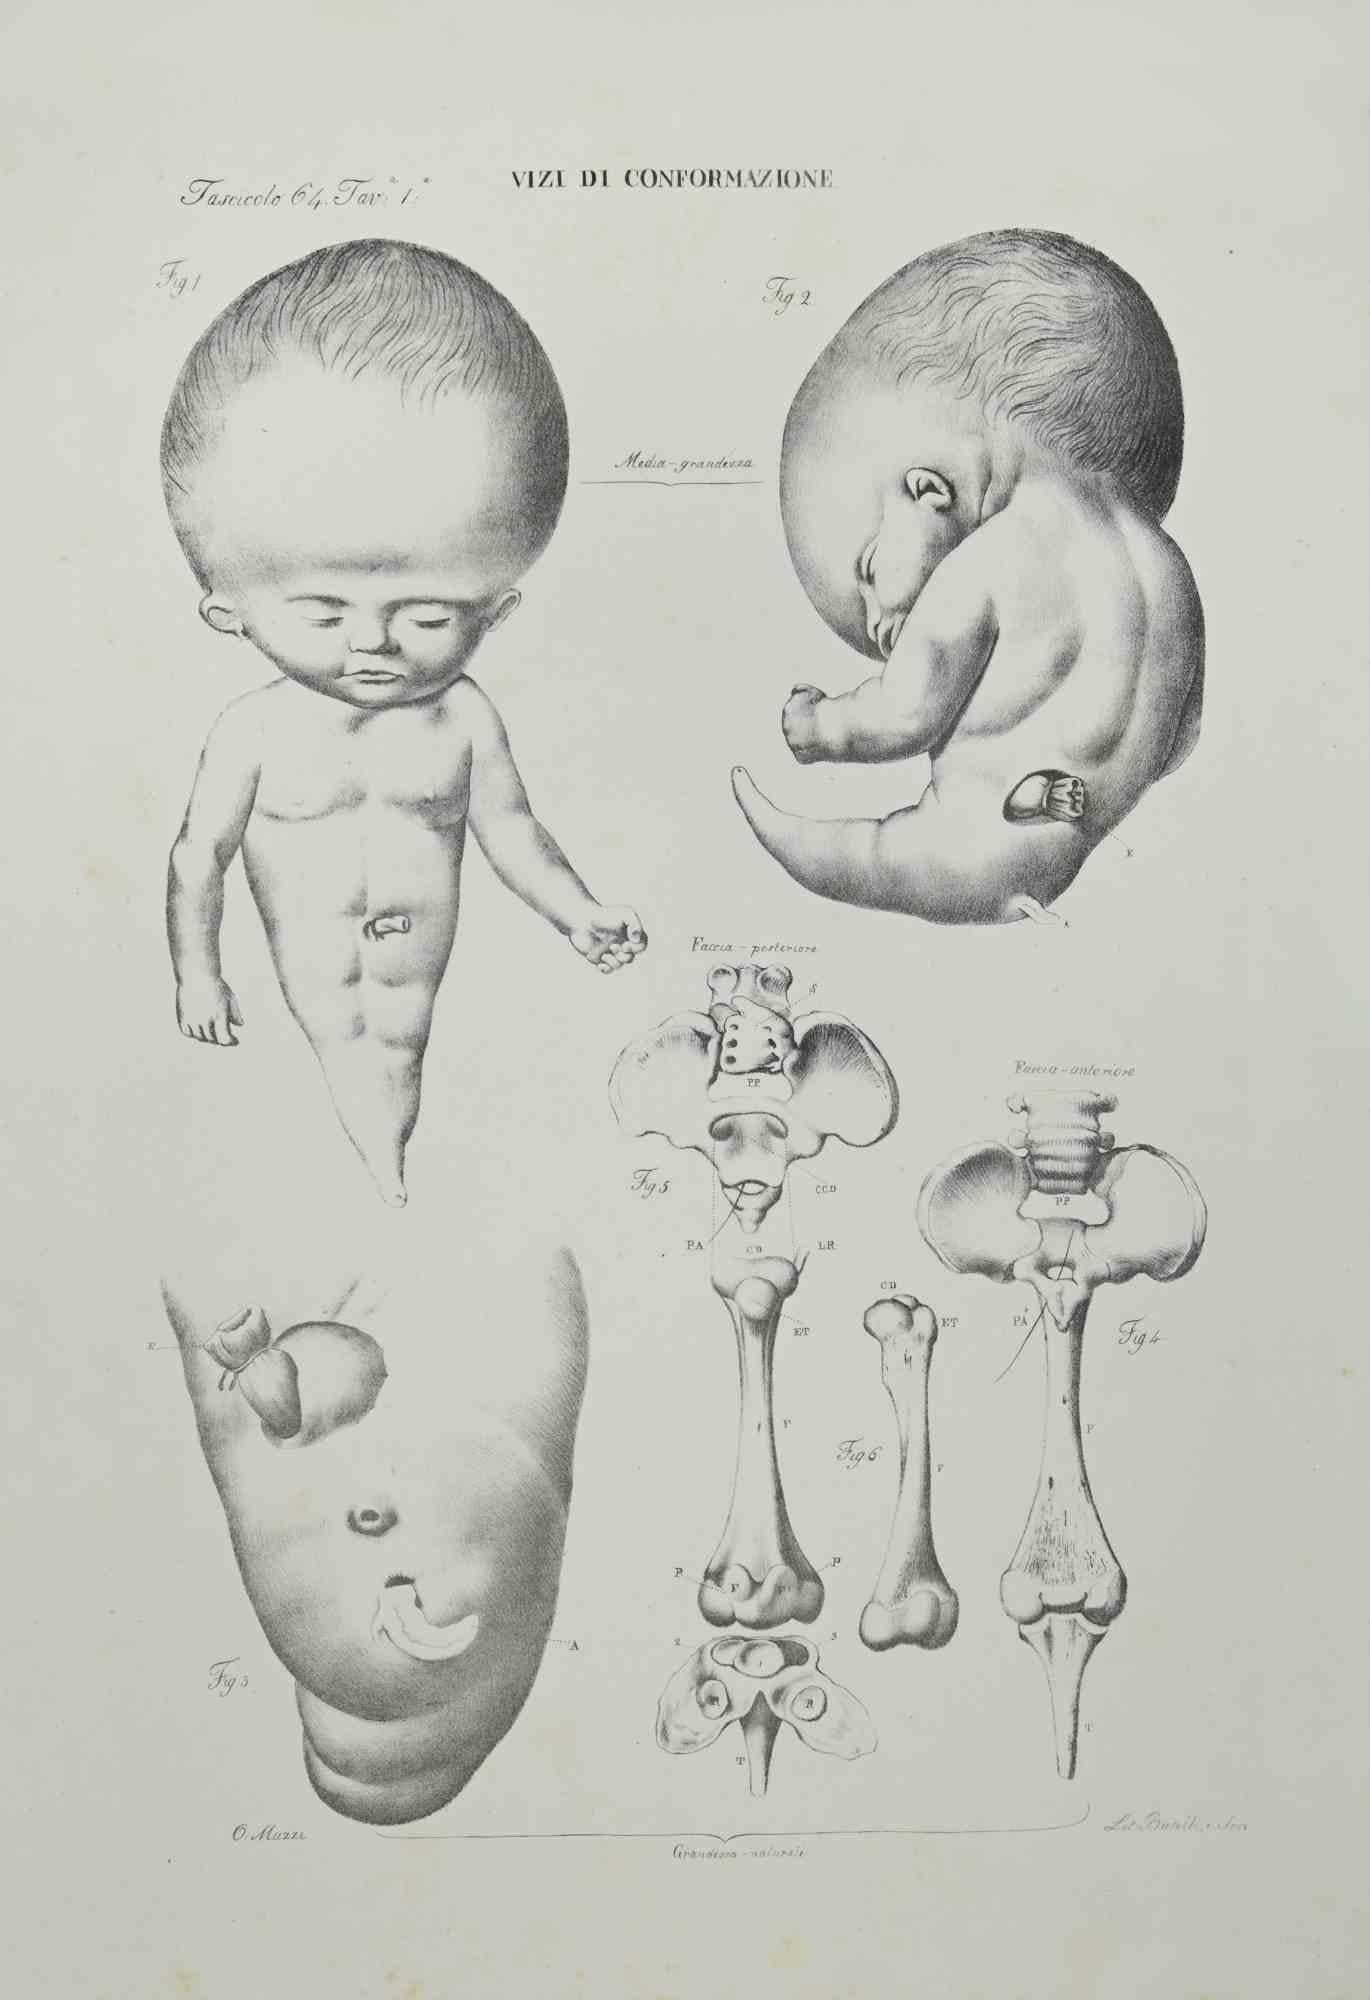 Conformation Defects is a lithograph realized by Ottavio Muzzi for the edition of Antoine Chazal, Human Anatomy, Printers Batelli and Ridolfi, 1843.

The work belongs to the Atlante generale della anatomia patologica del corpo umano by Jean